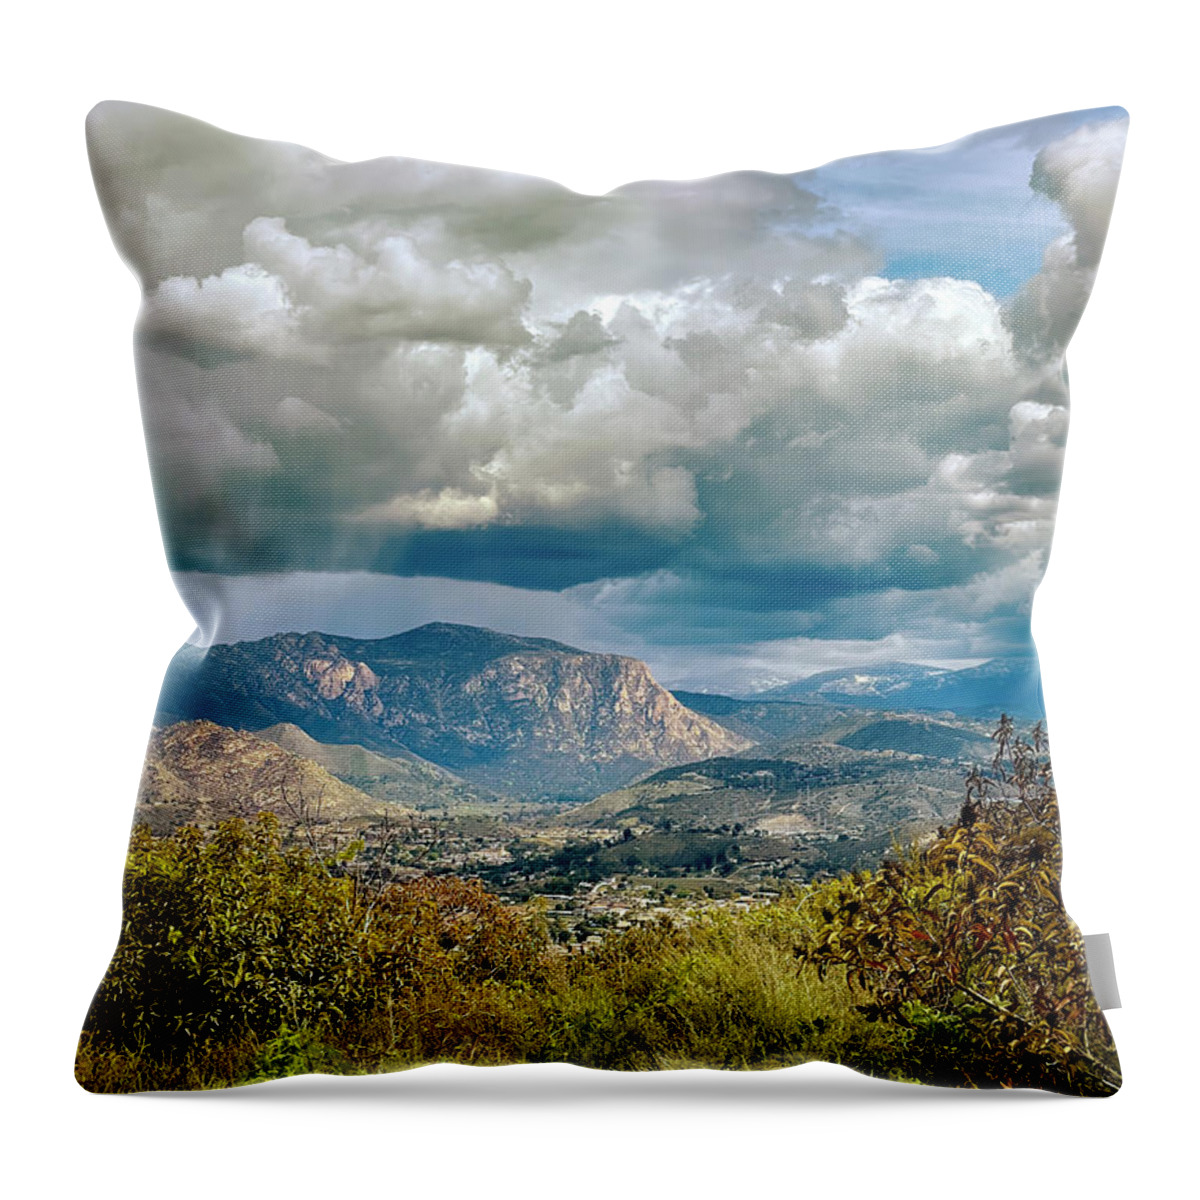 Mountain Throw Pillow featuring the photograph El Capitan by Dan McGeorge